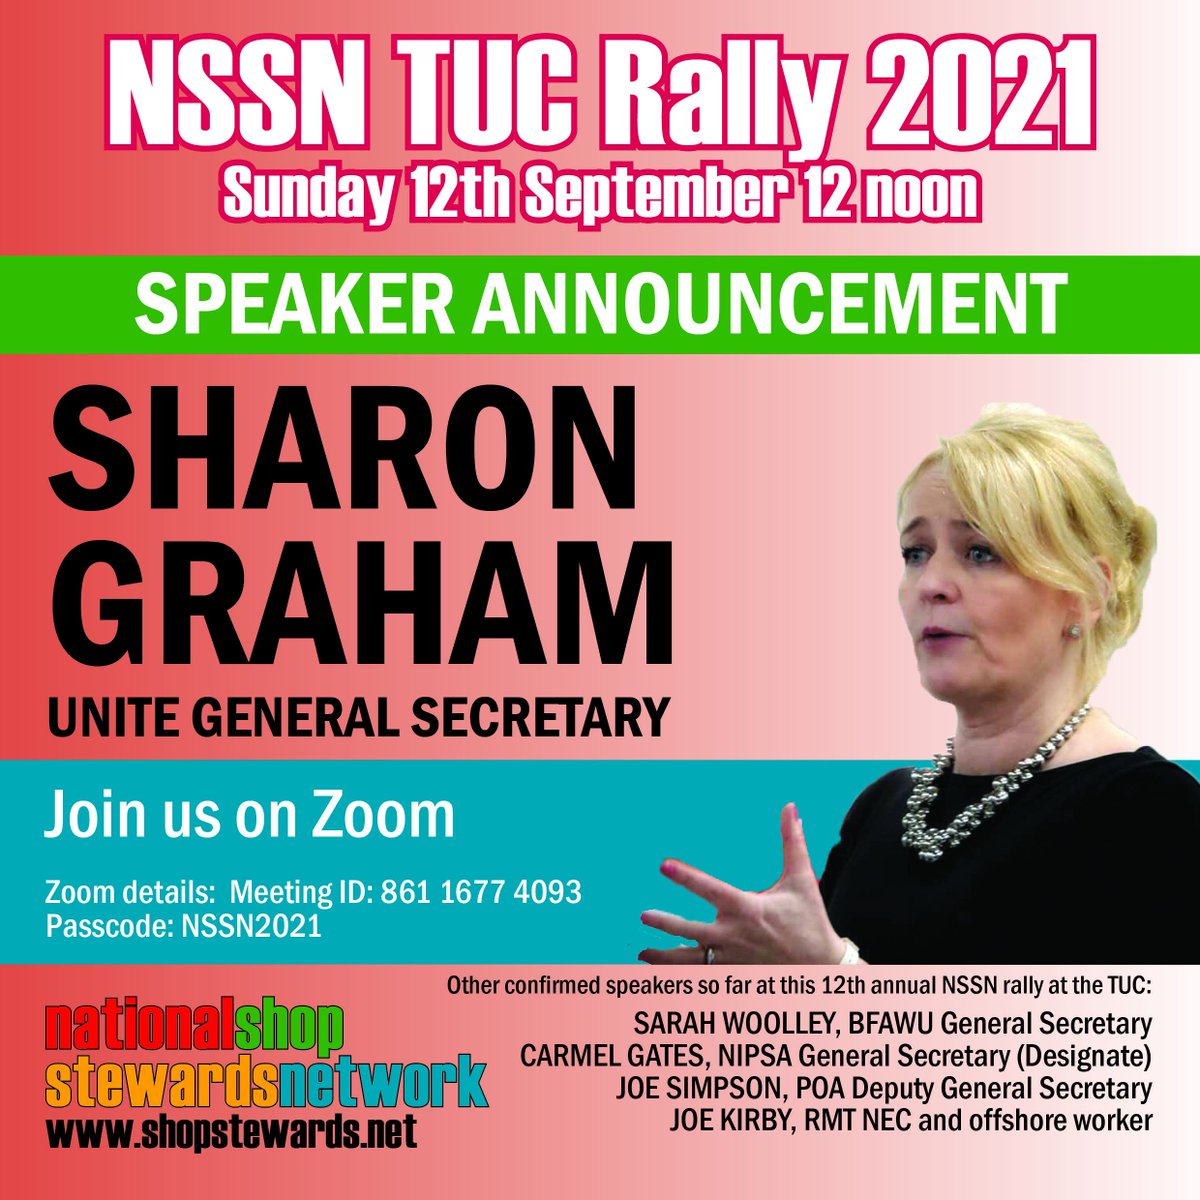 Your weekend plans should include this!
Hear activists from around the country and Unite General Secretary @UniteSharon at the annual @NSSN_AntiCuts TUC meeting: housingworkers.org.uk/readevents.htm… #housingworkers #TUC21 #TUC2021